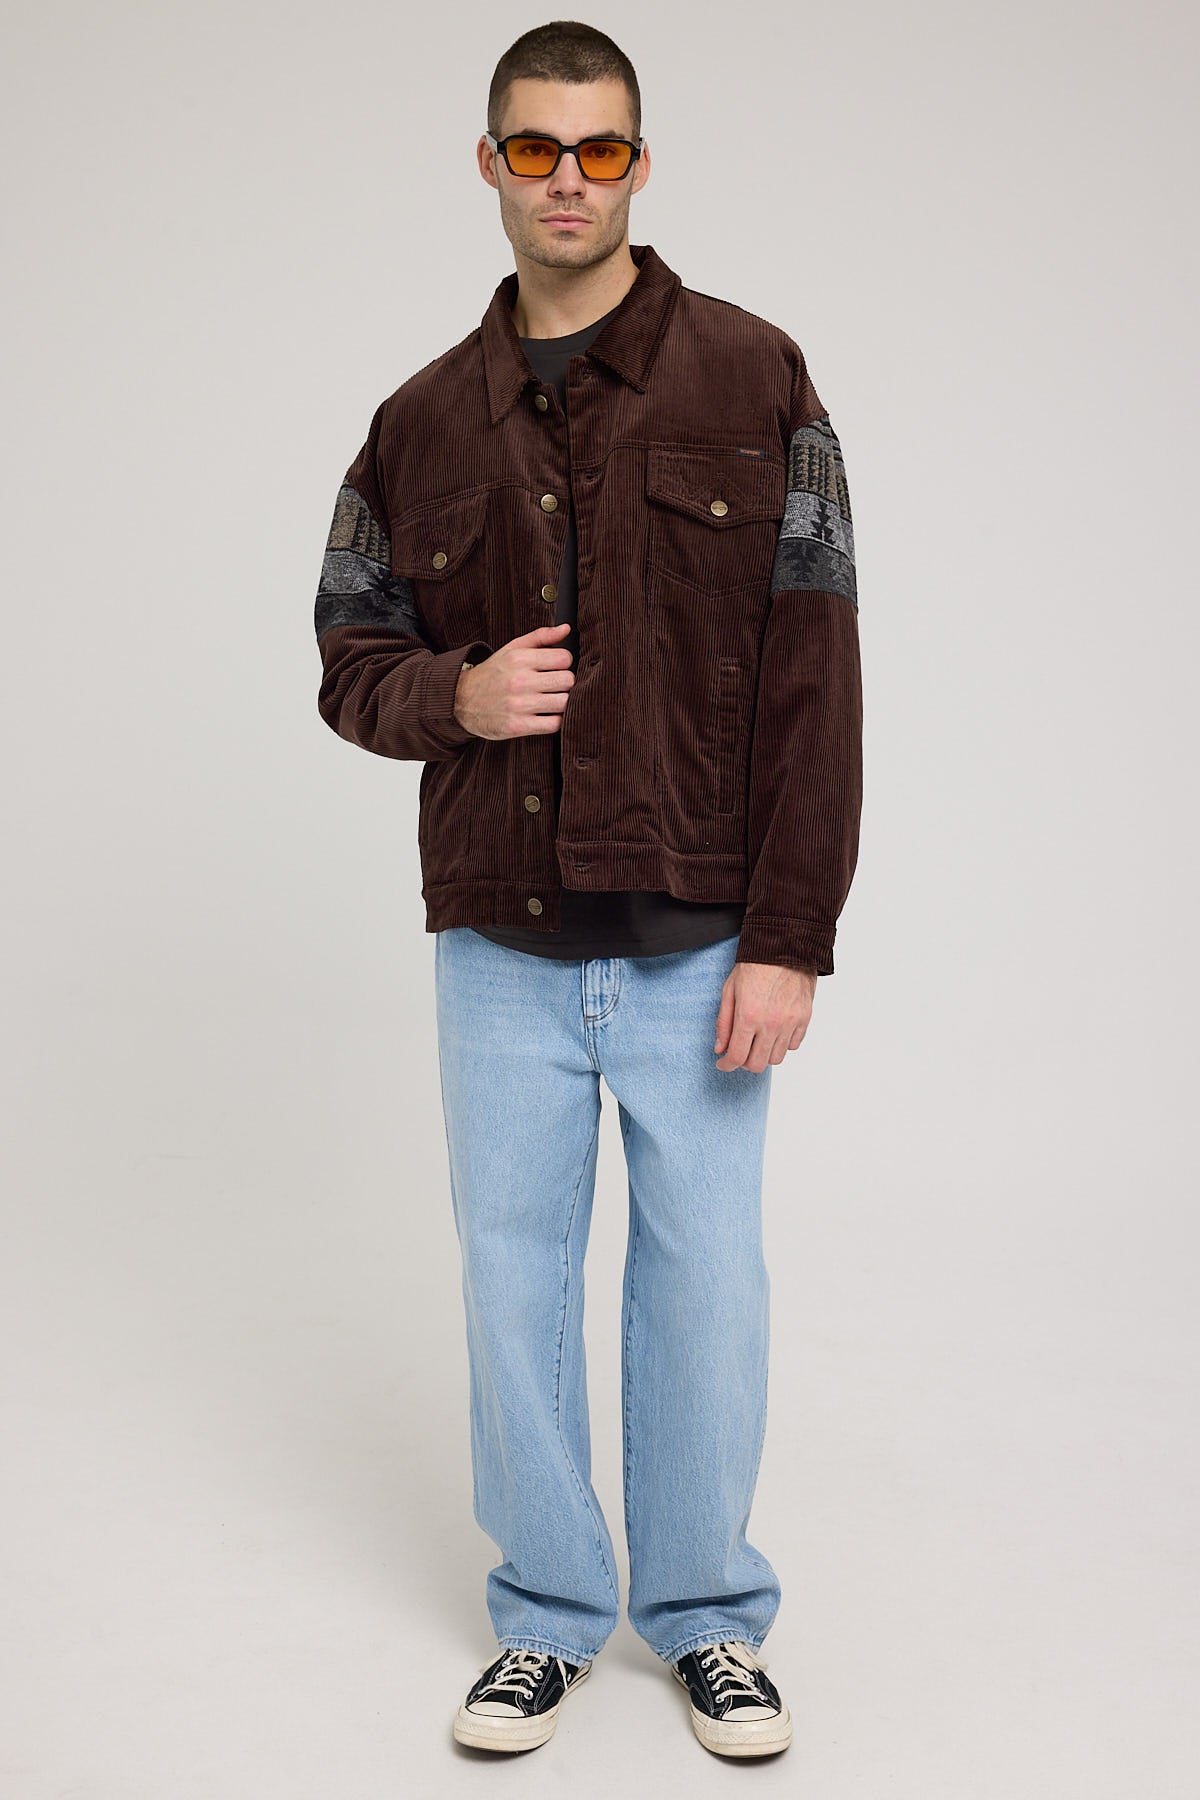 Wrangler Slouch Sherpa Jacket Brown Cord